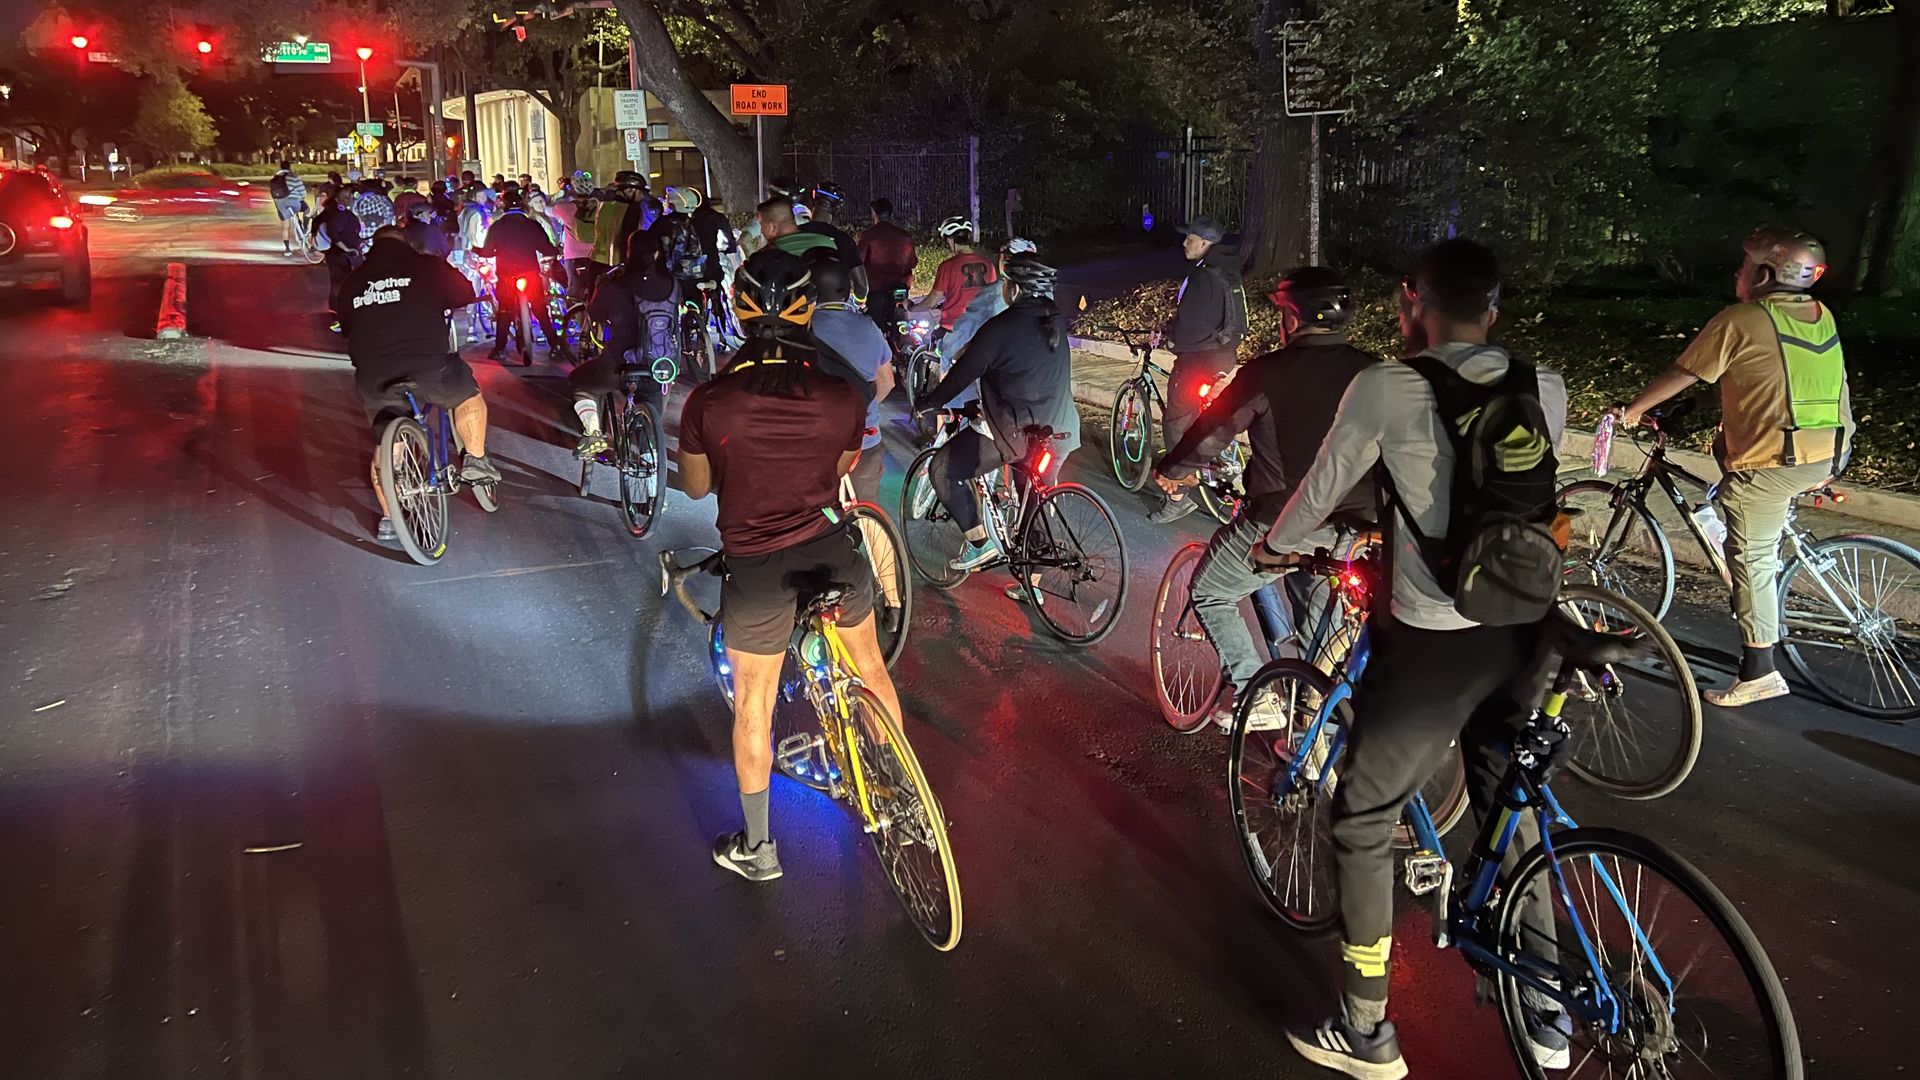 A group of about 100 cyclists stopped at a red light at night